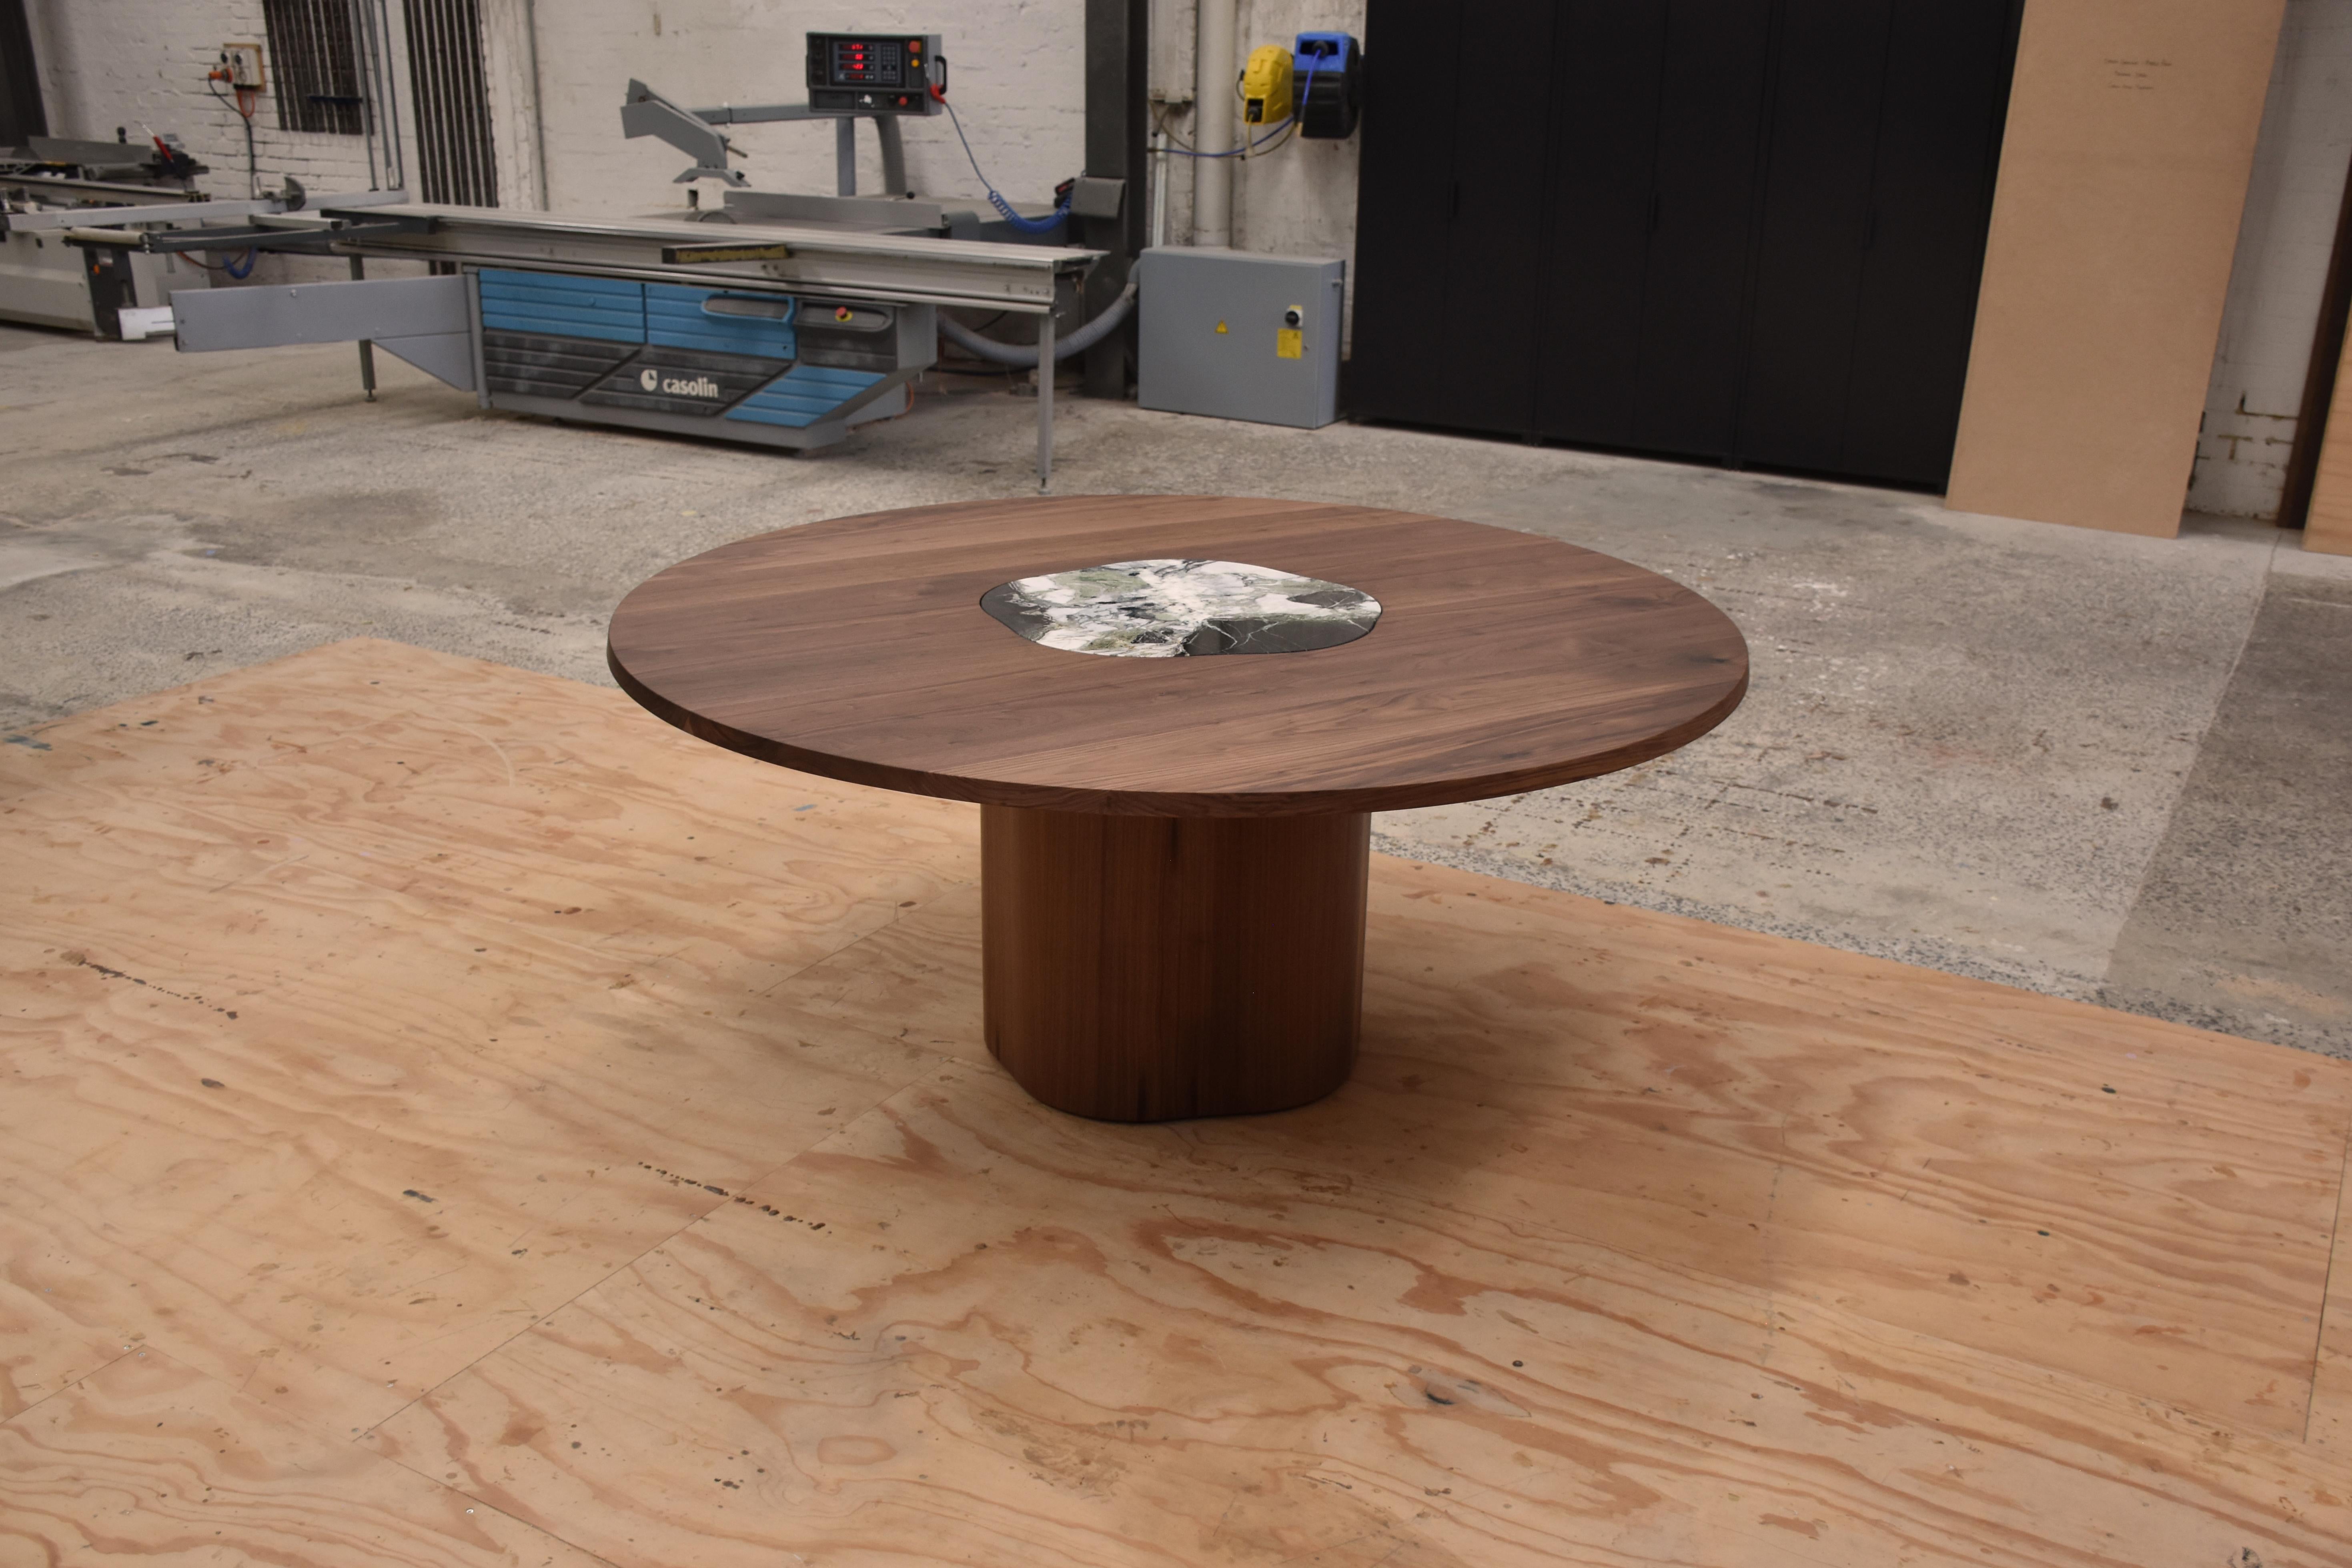 Ghanem Rectangular Dining Table by Daniel Poole
Dimensions: D 120 x W 300 x H 74 cm. 
Materials: American Back Walnut with 10% gloss lacquer and stone.

This table includes a certificate of authenticity. There is also a rectangular option with